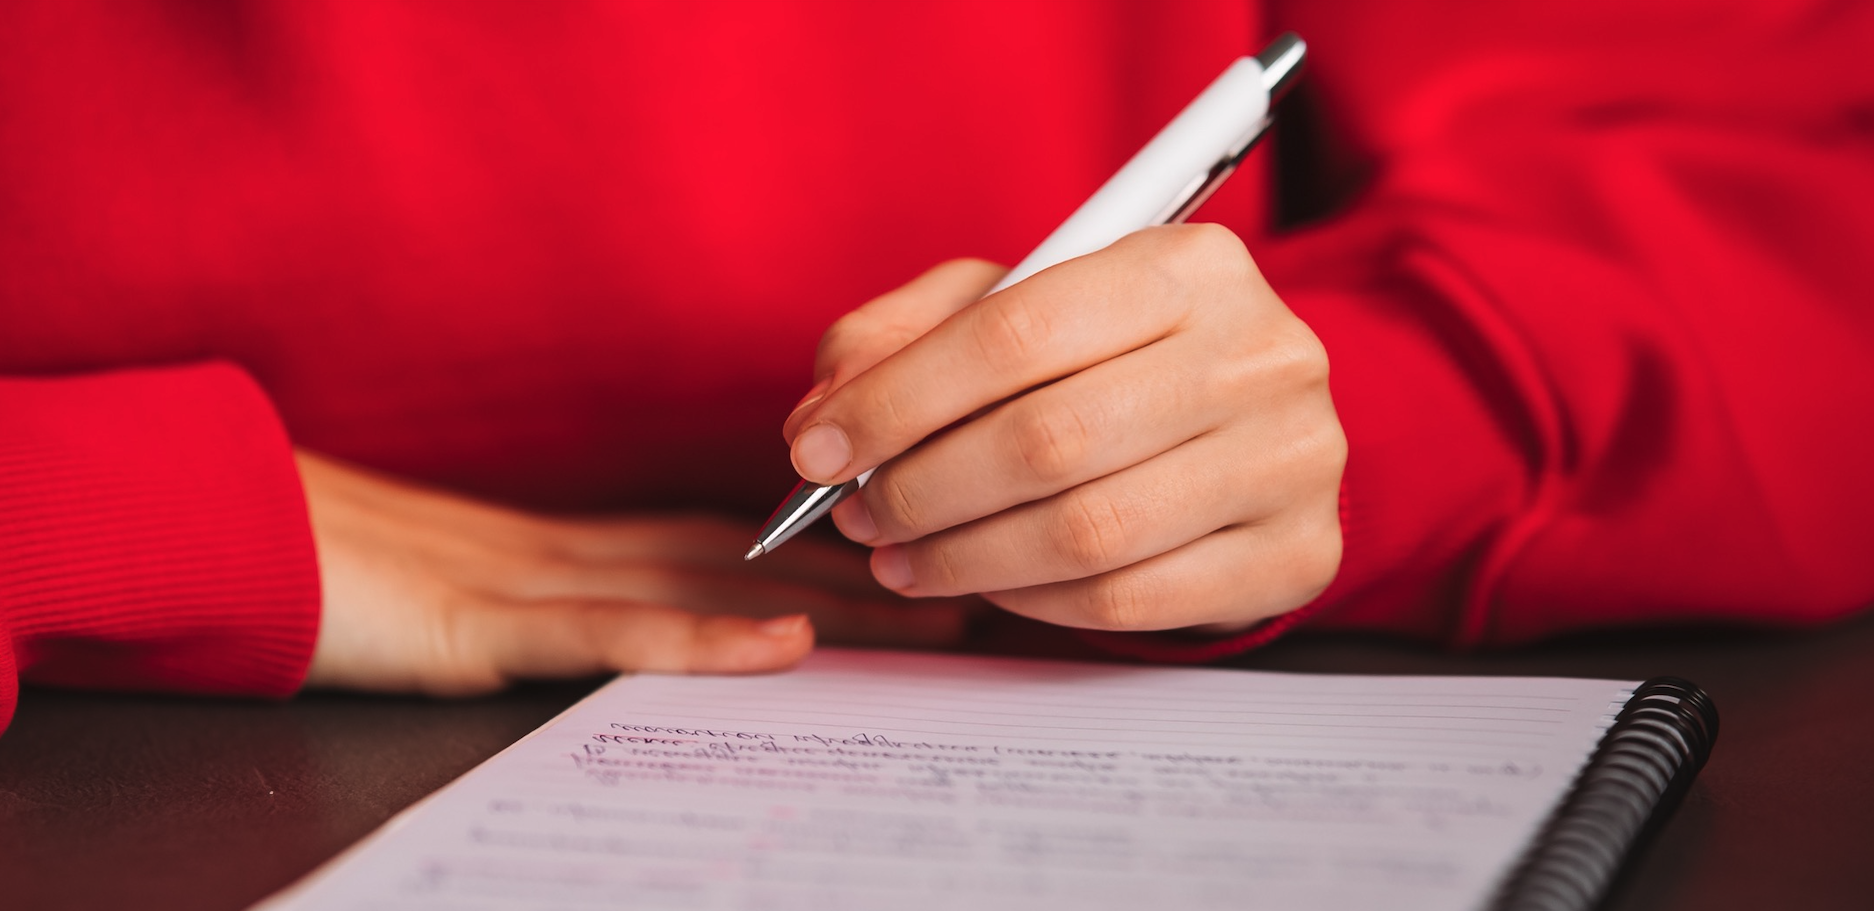 a woman wearing a red shirt writing in a notebook.